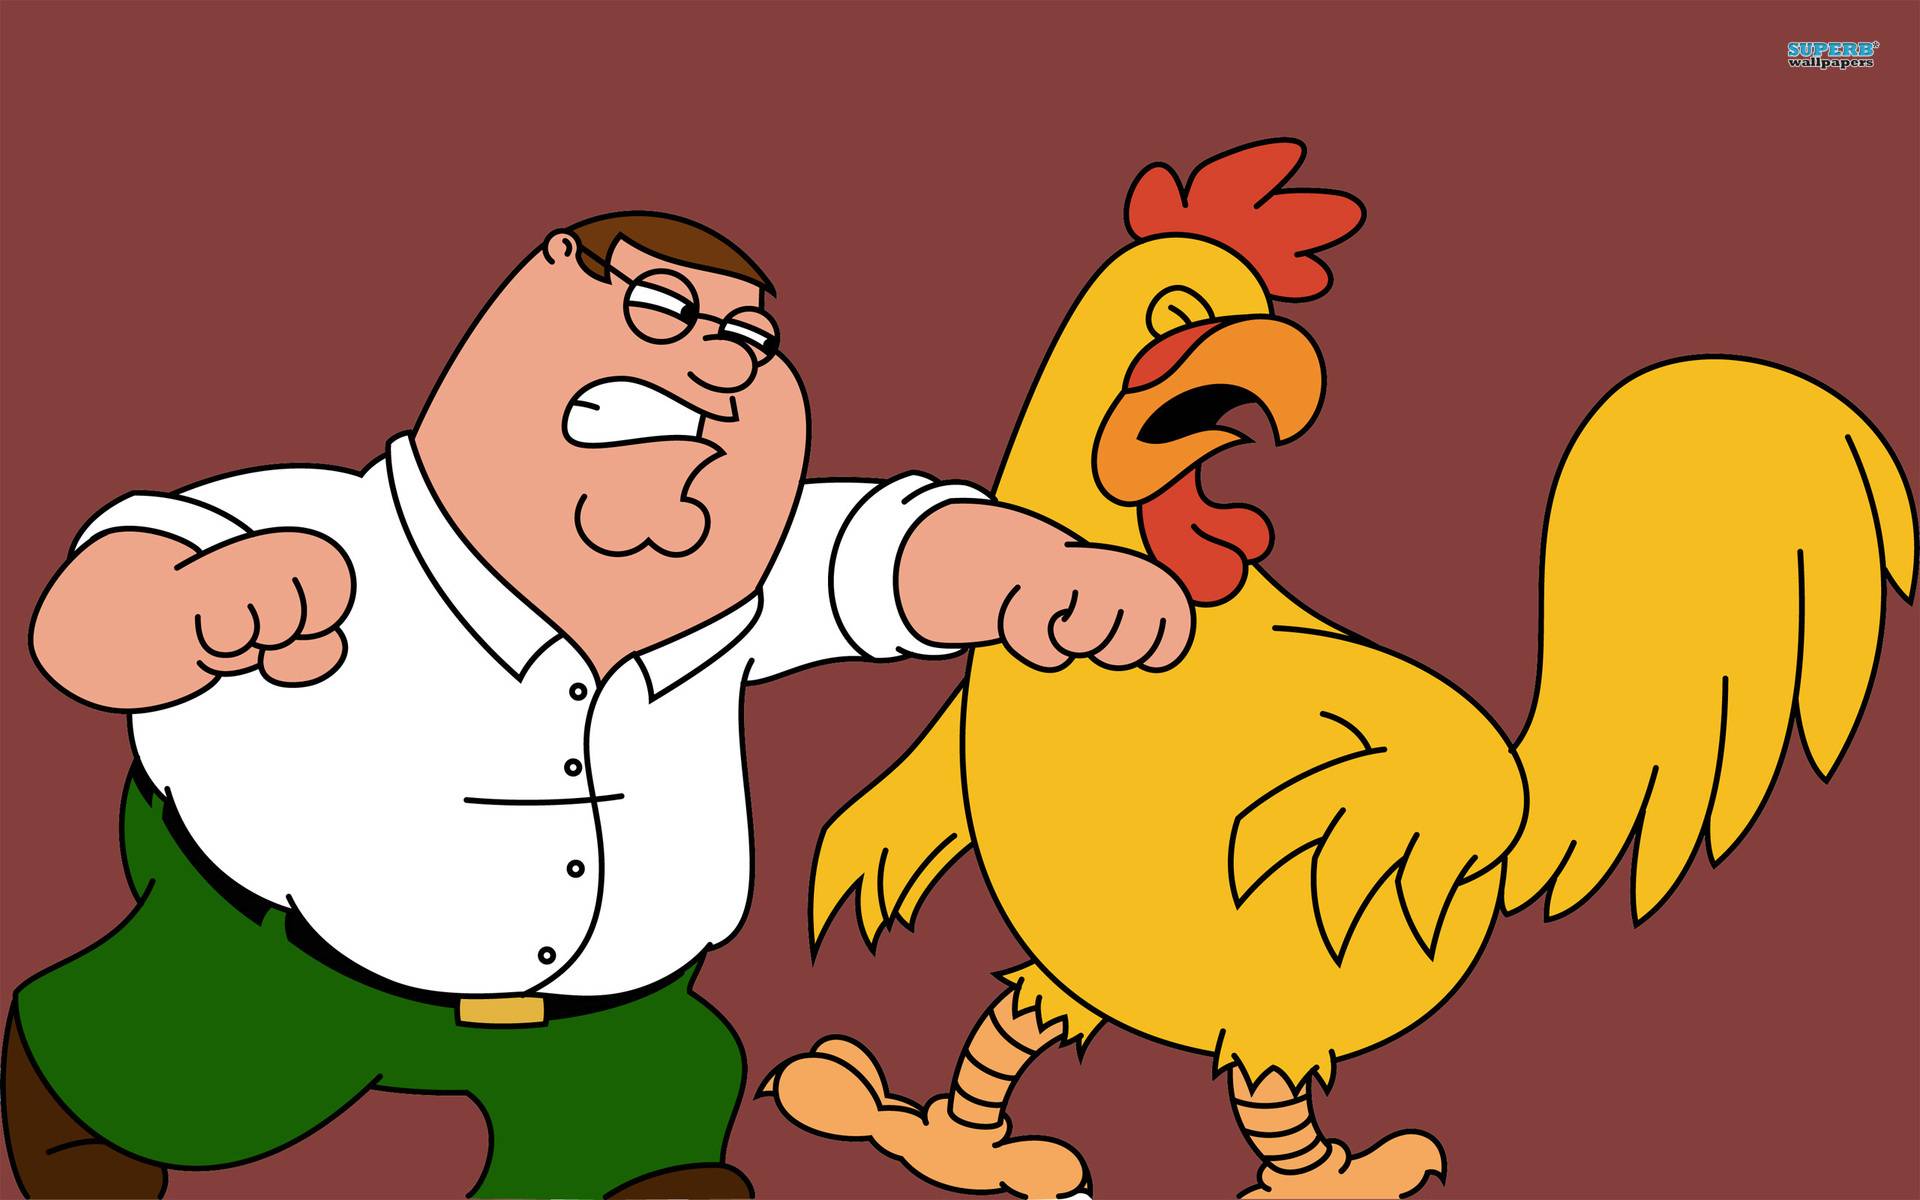 Peter Peter in a chicken fight